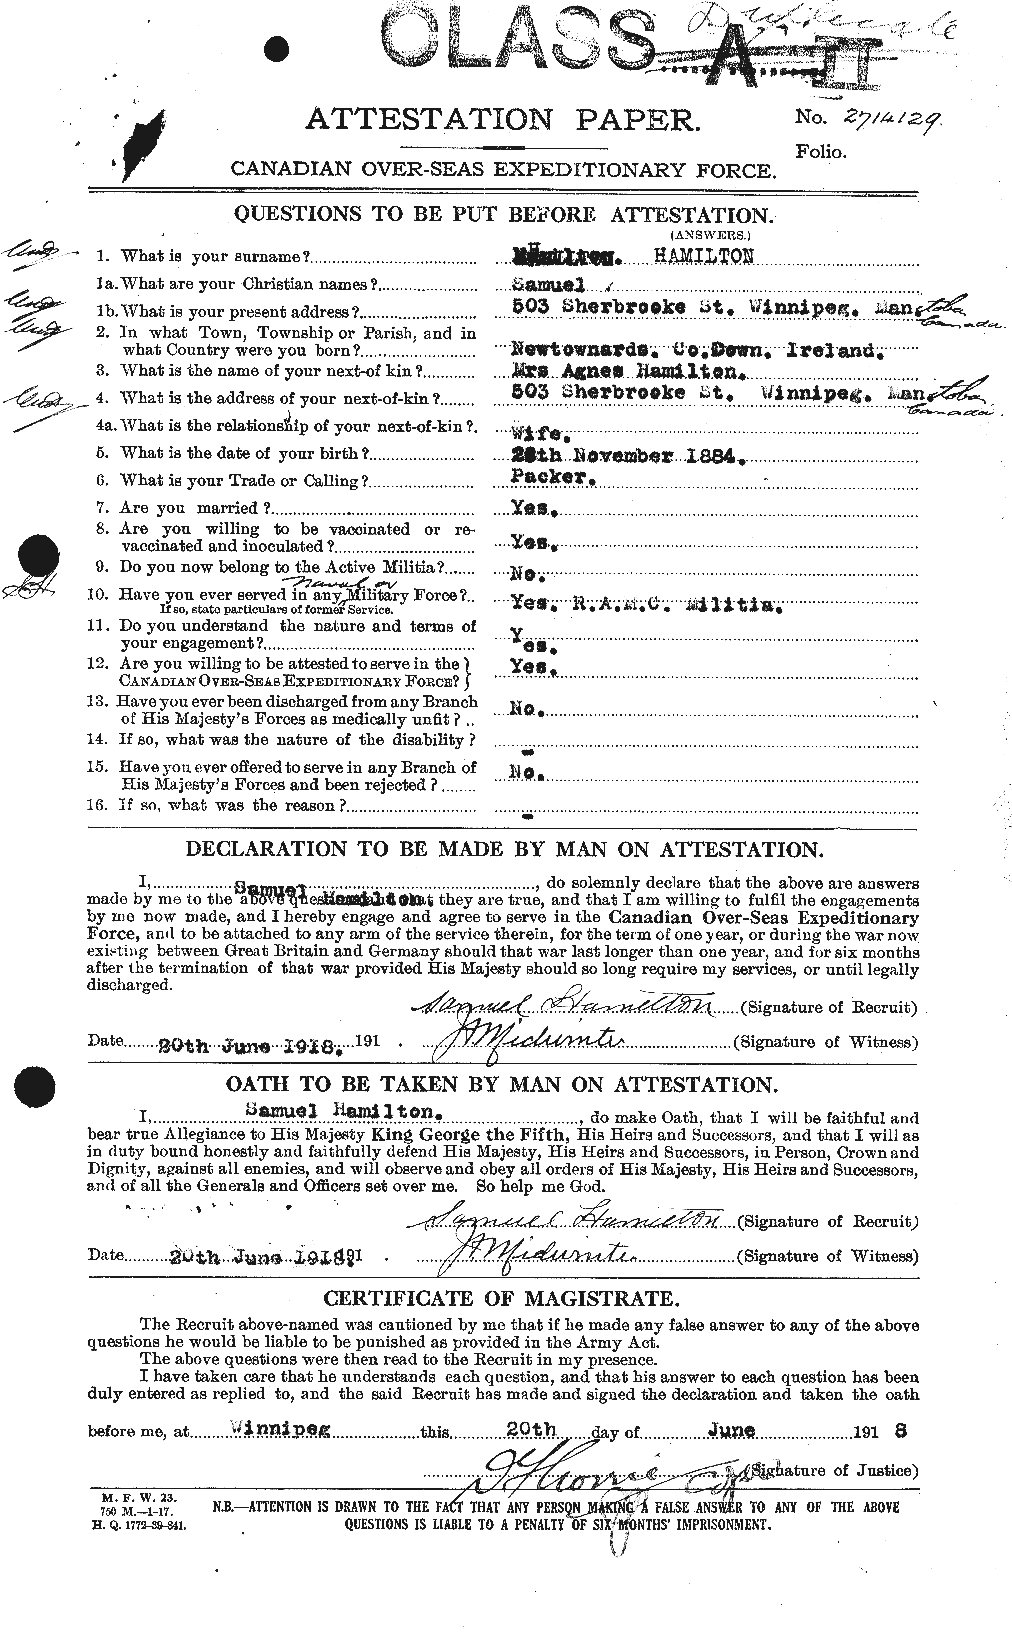 Personnel Records of the First World War - CEF 373300a